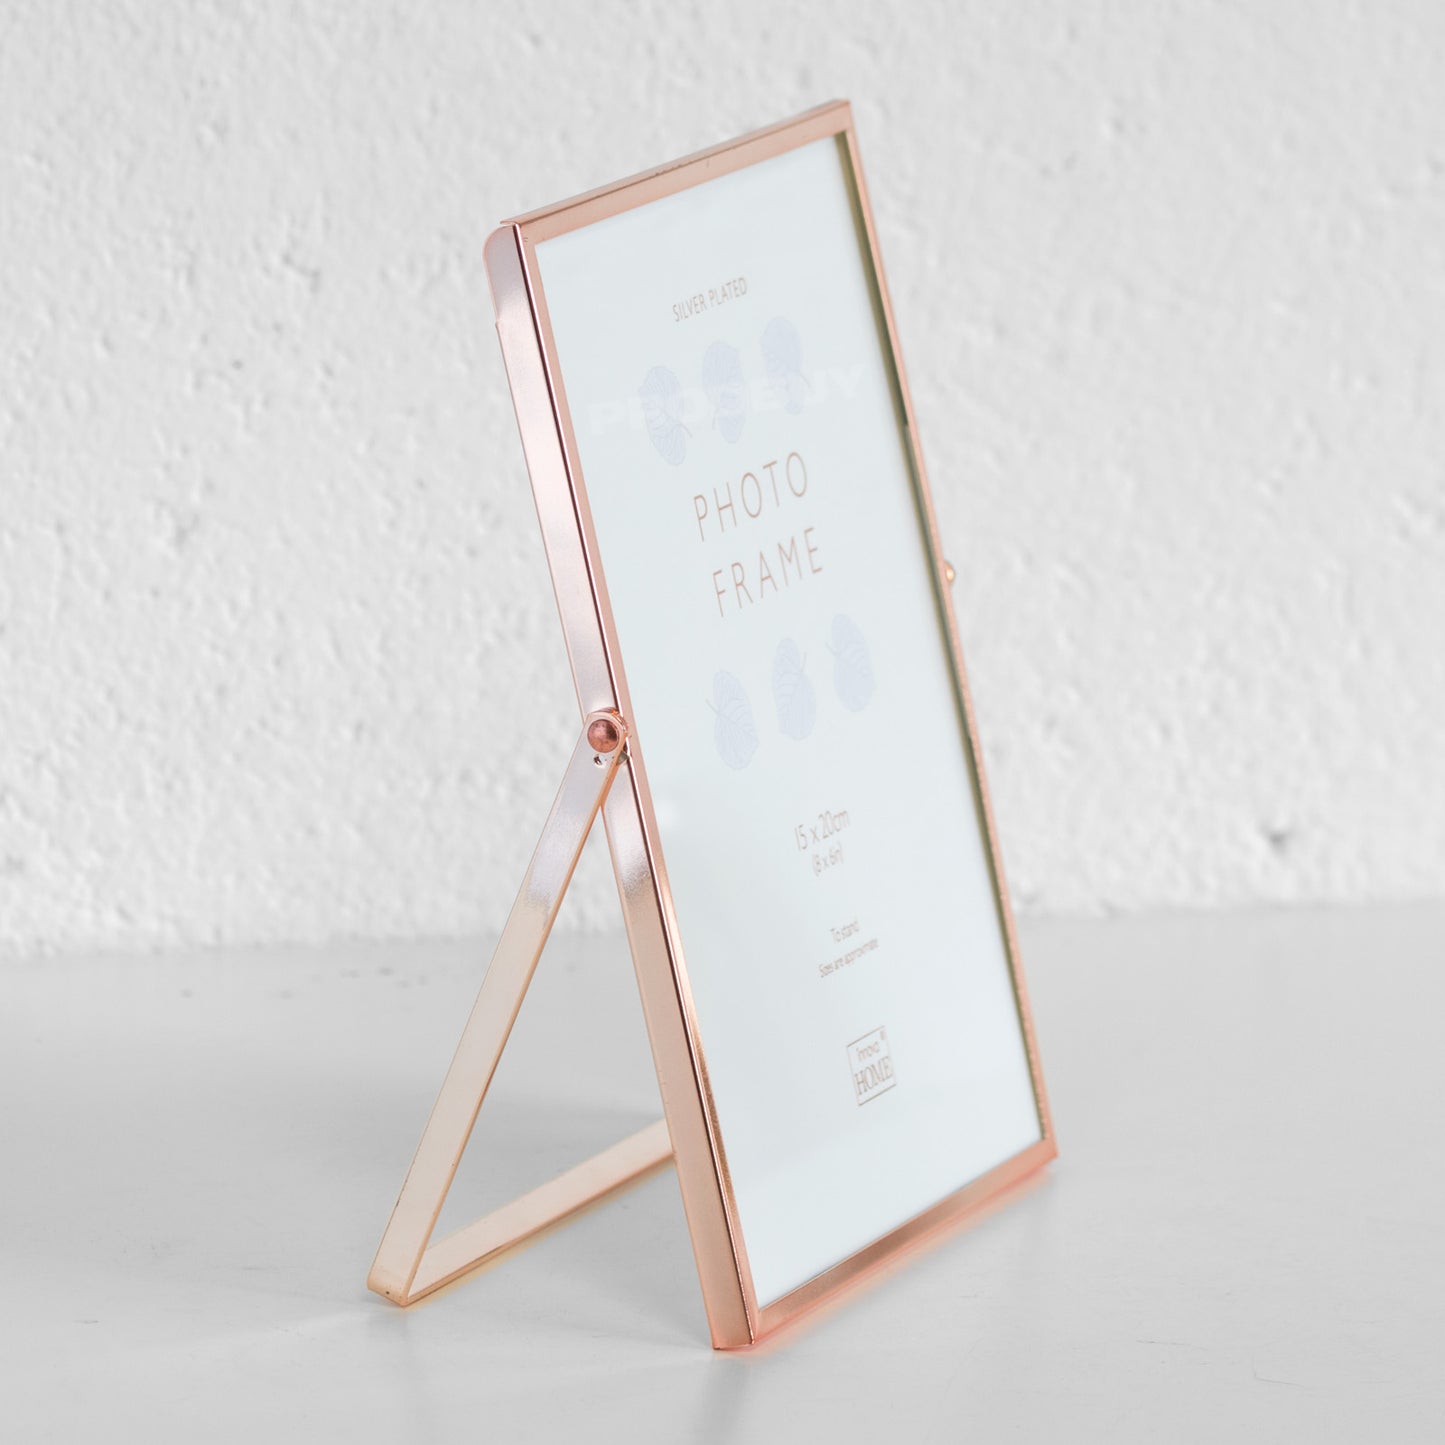 Standing 8x6" Copper Photo Frame